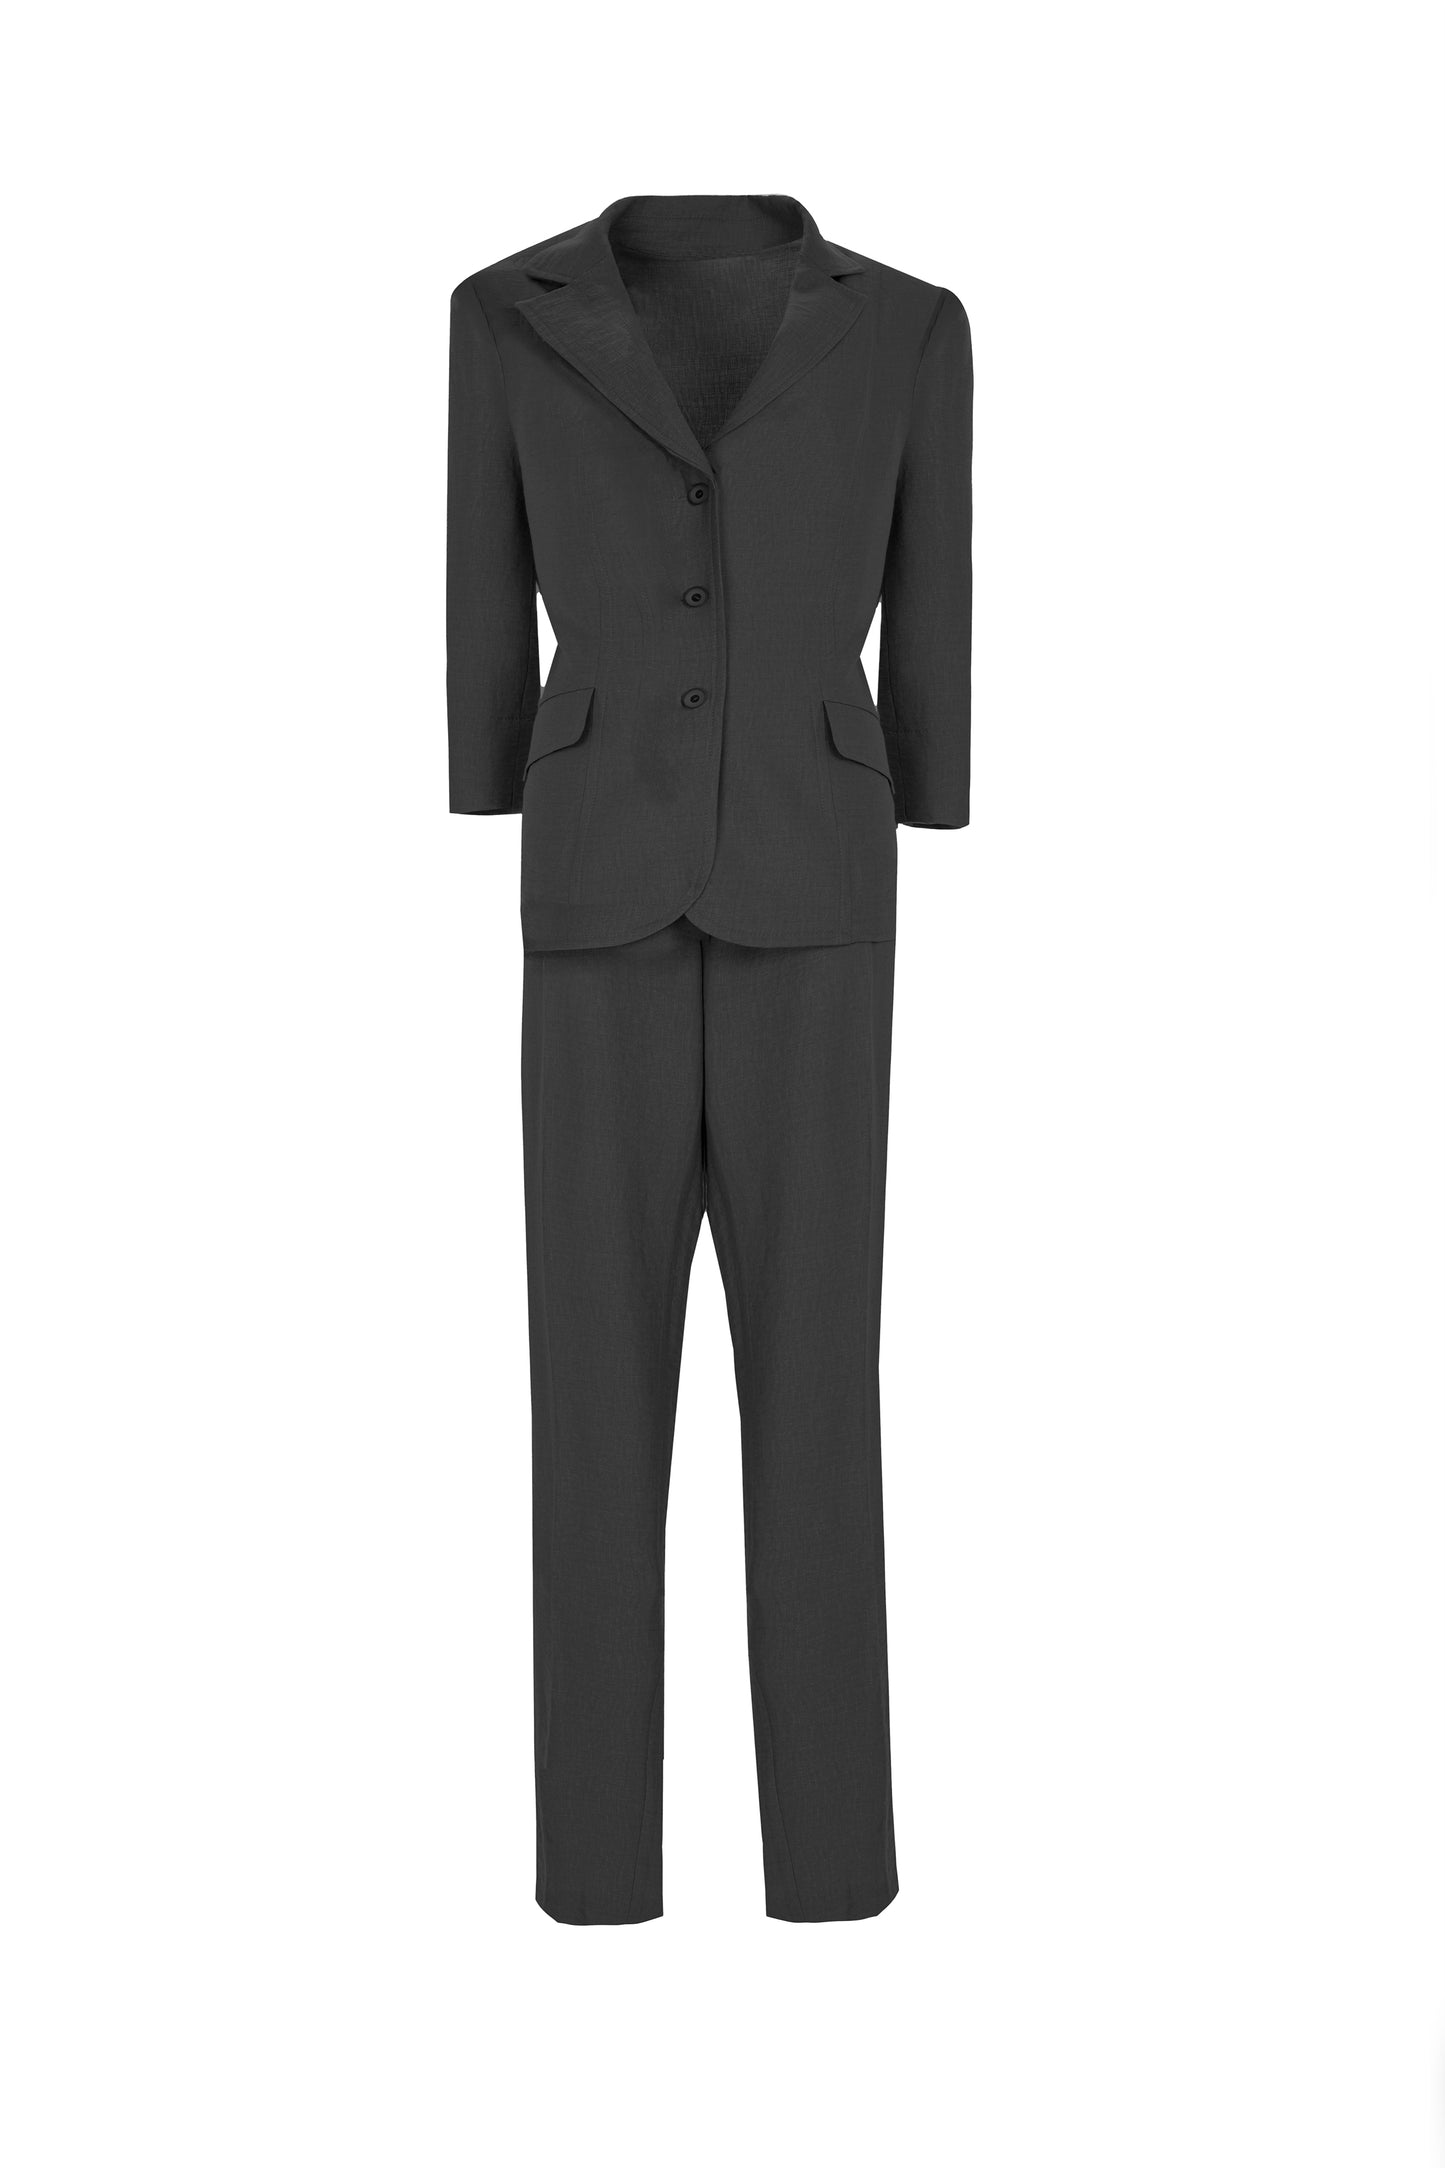 Collared Jacket and Trousers Suit